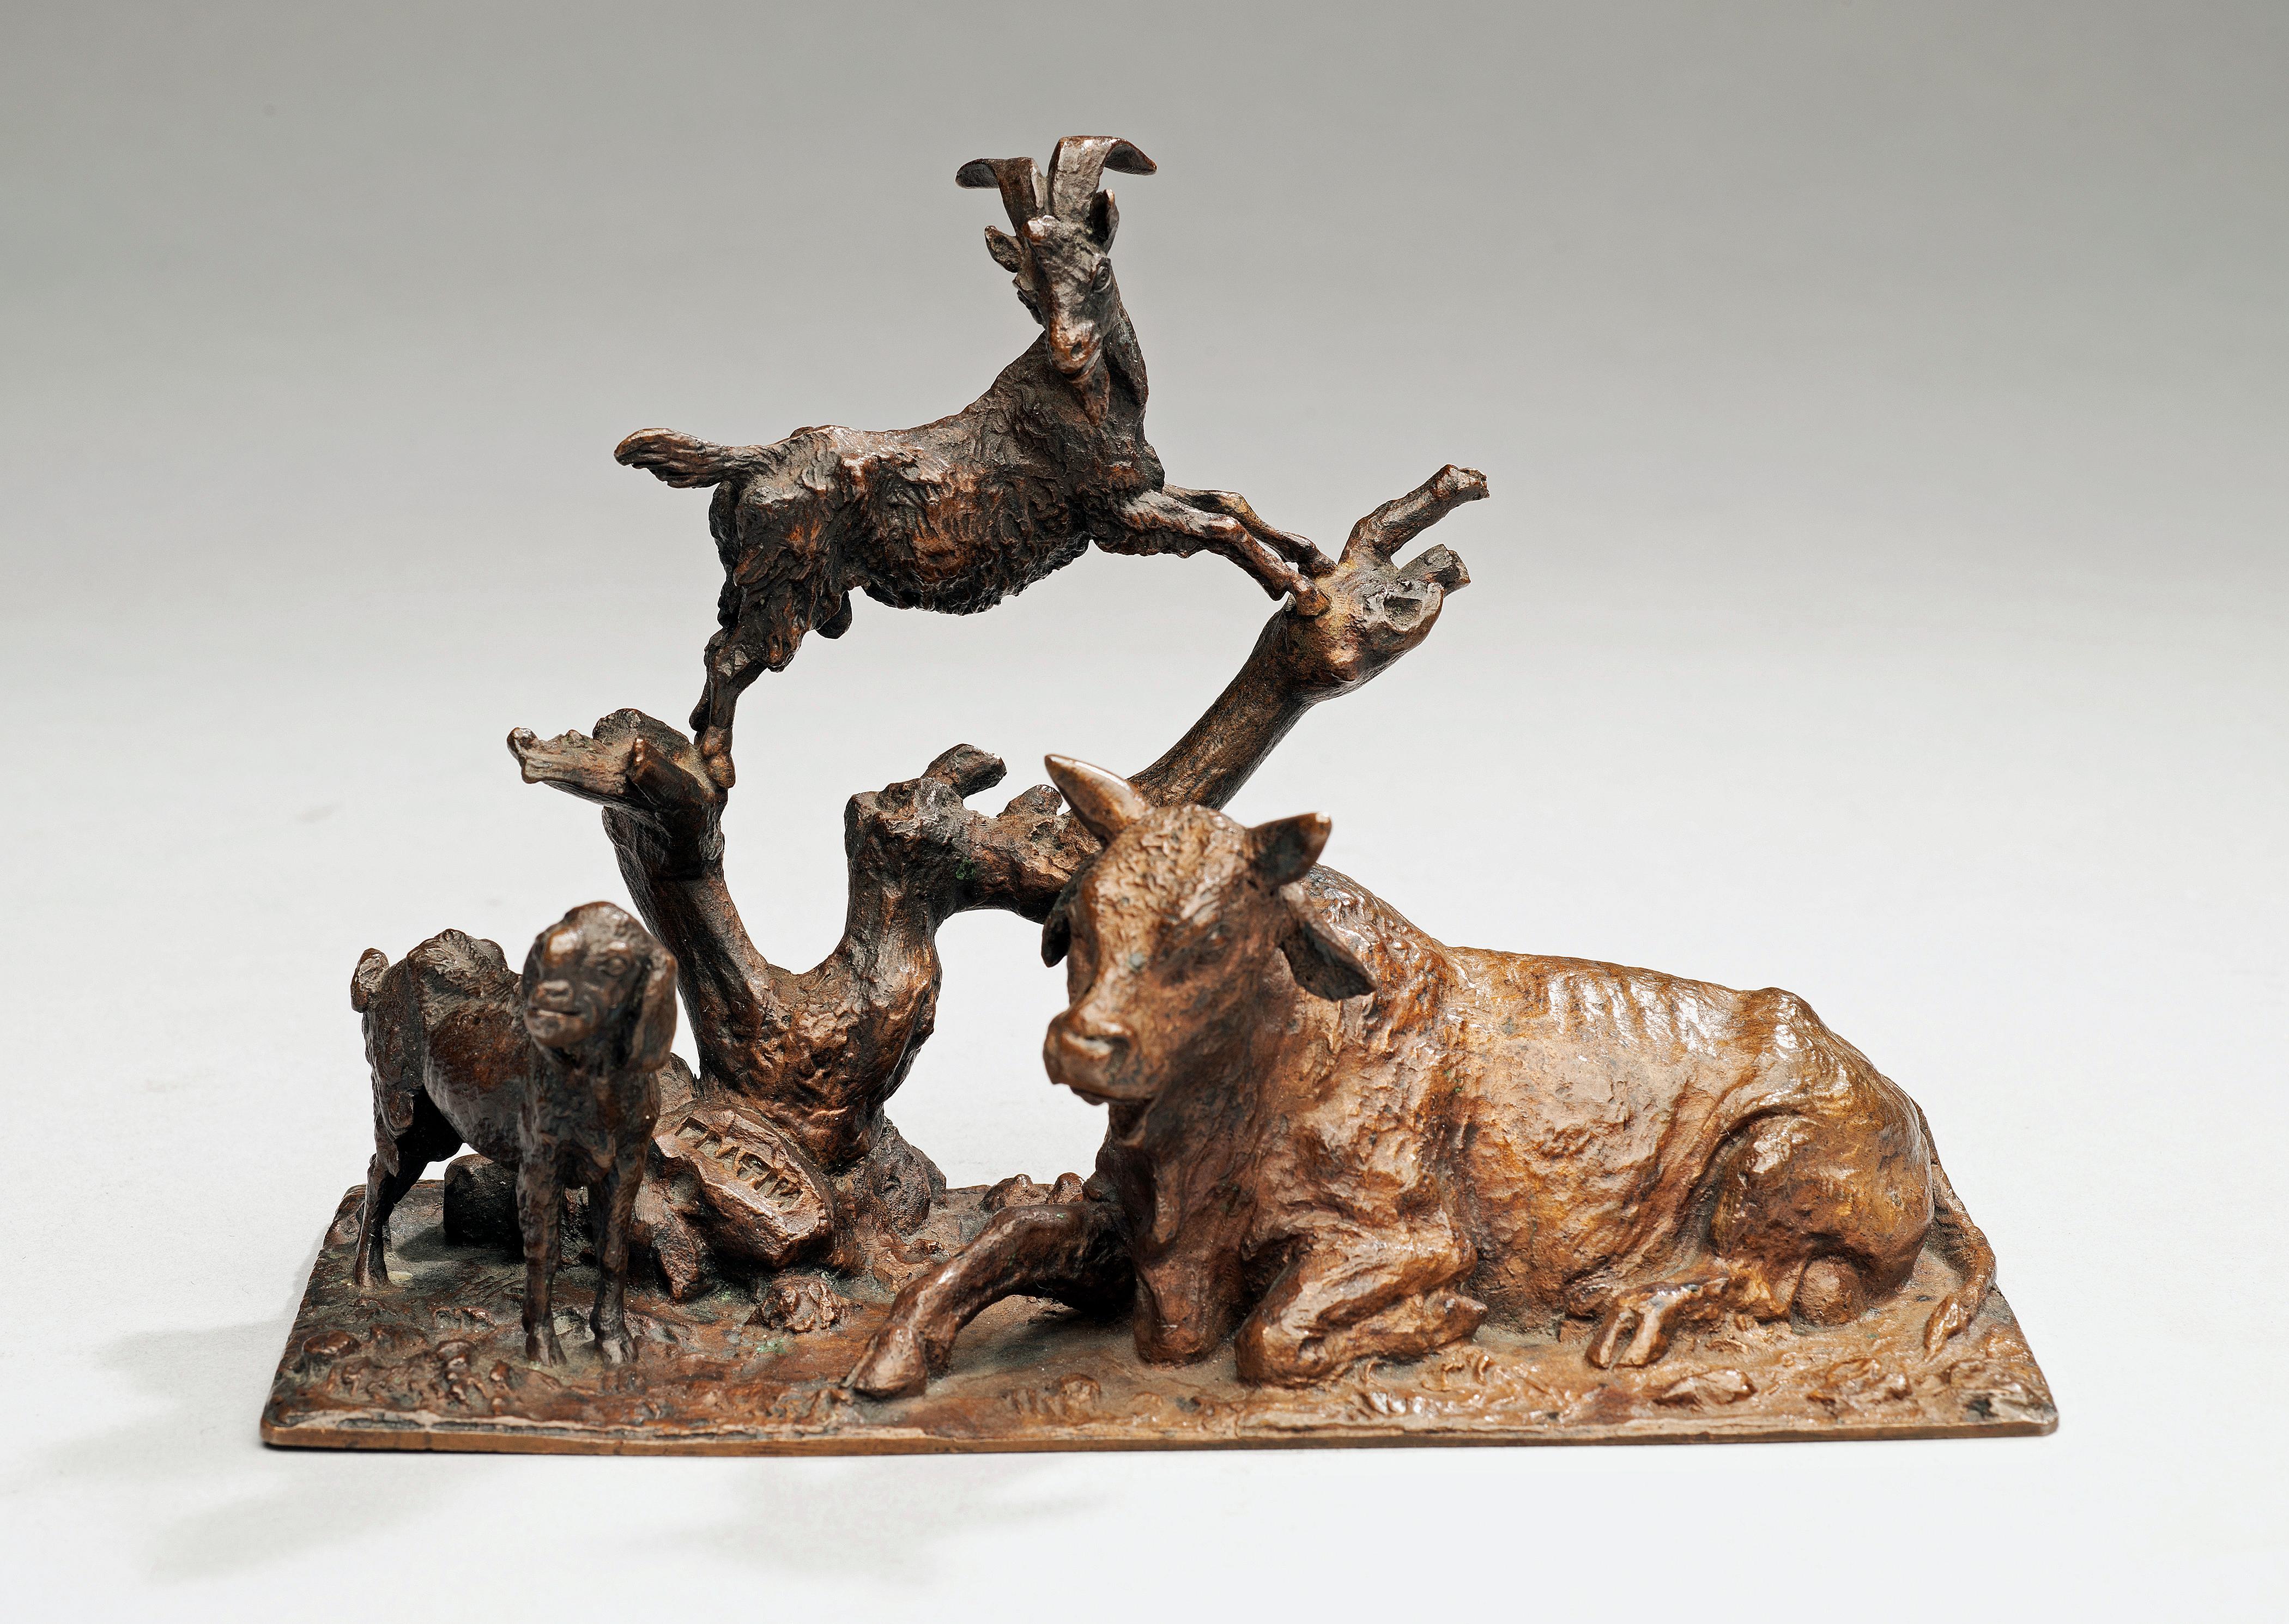 Antique Bronze Miniature Barnyard with a Bull, Sheep & Goat circa 1860, France - Sculpture by Christopher Fratin